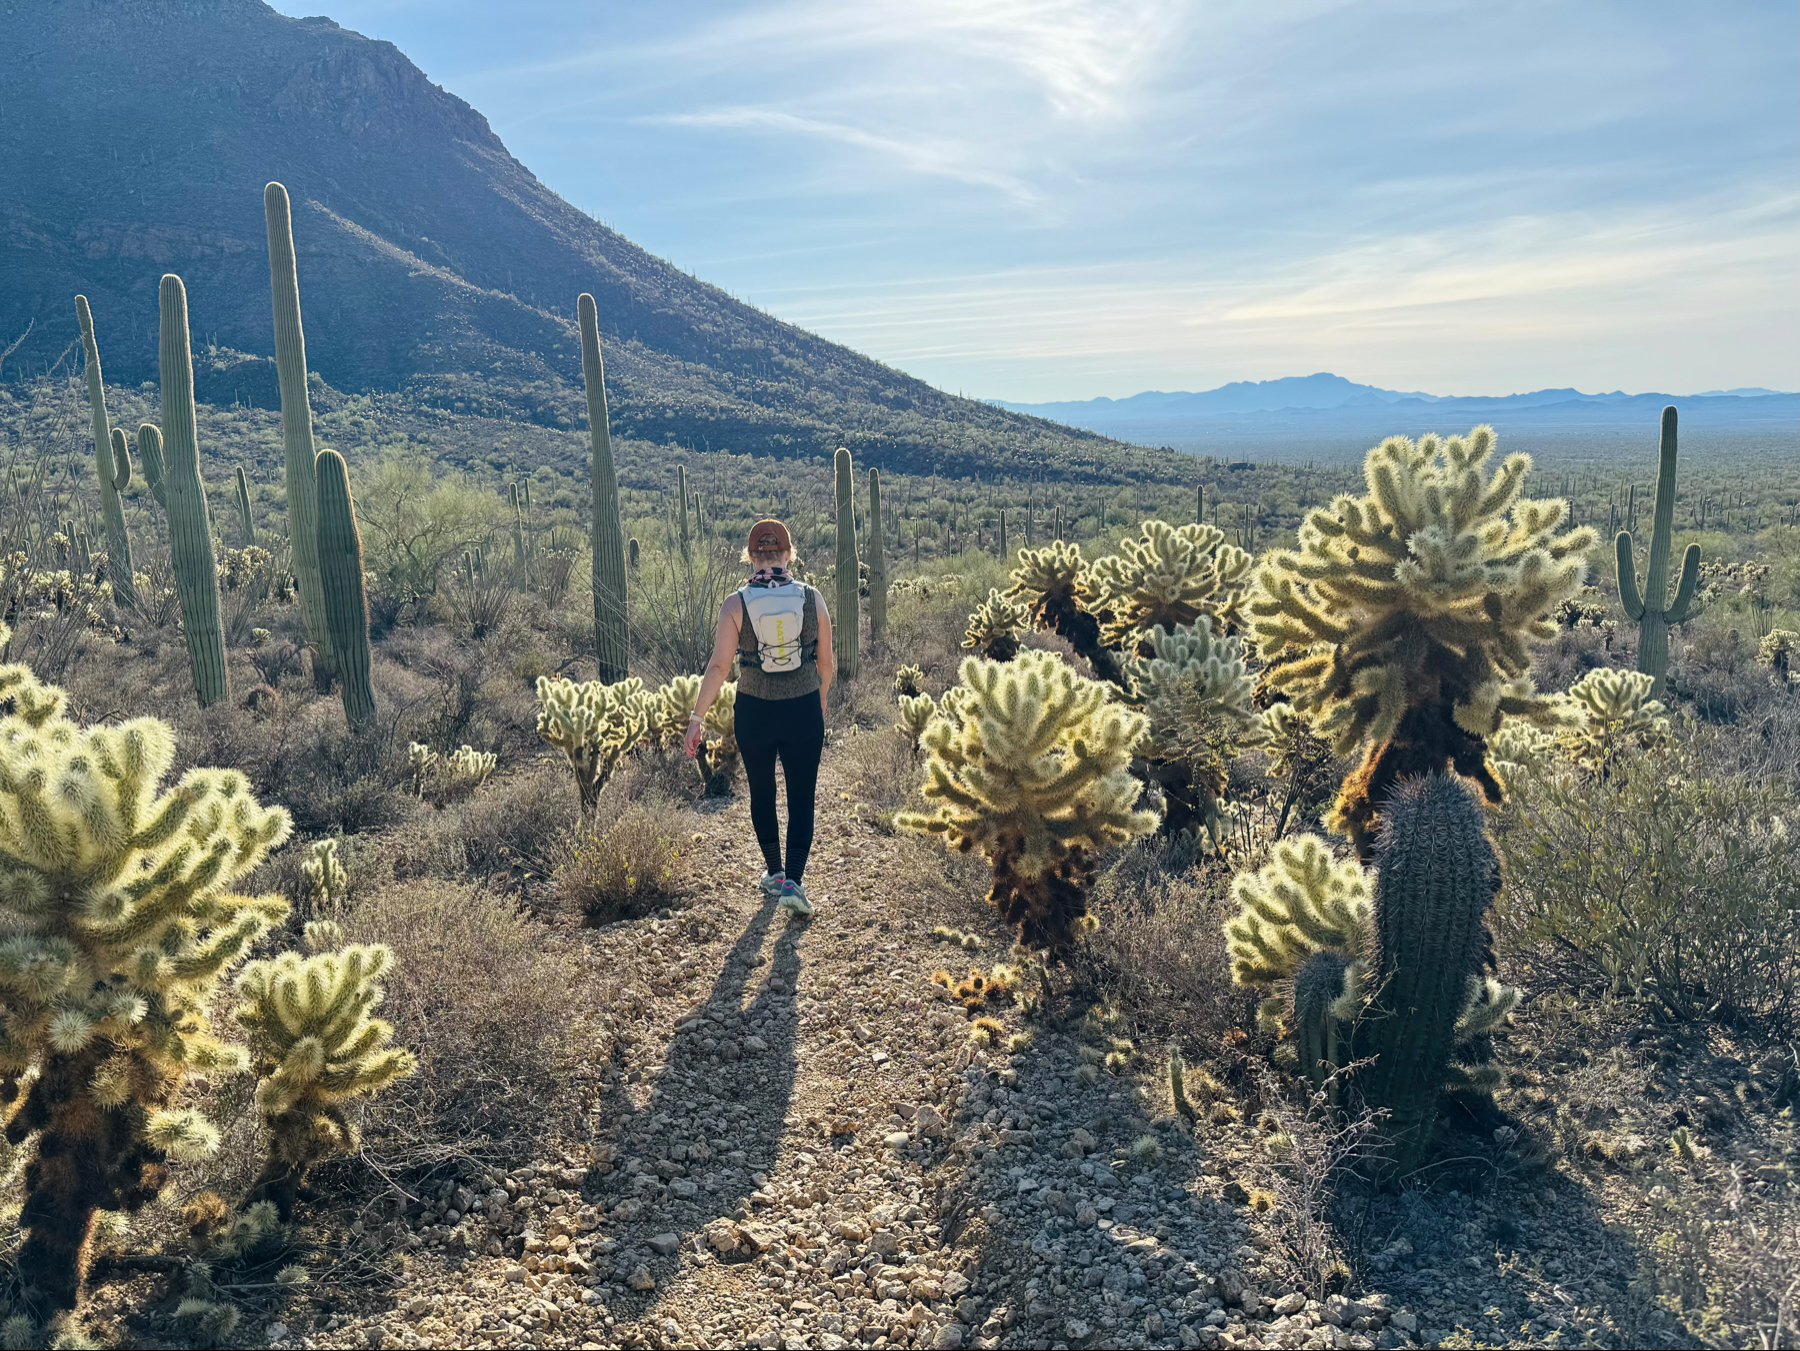 A person hiking on a desert trail surrounded by various cacti, including tall saguaros and bushy cholla, with a mountain in the background under a clear sky.